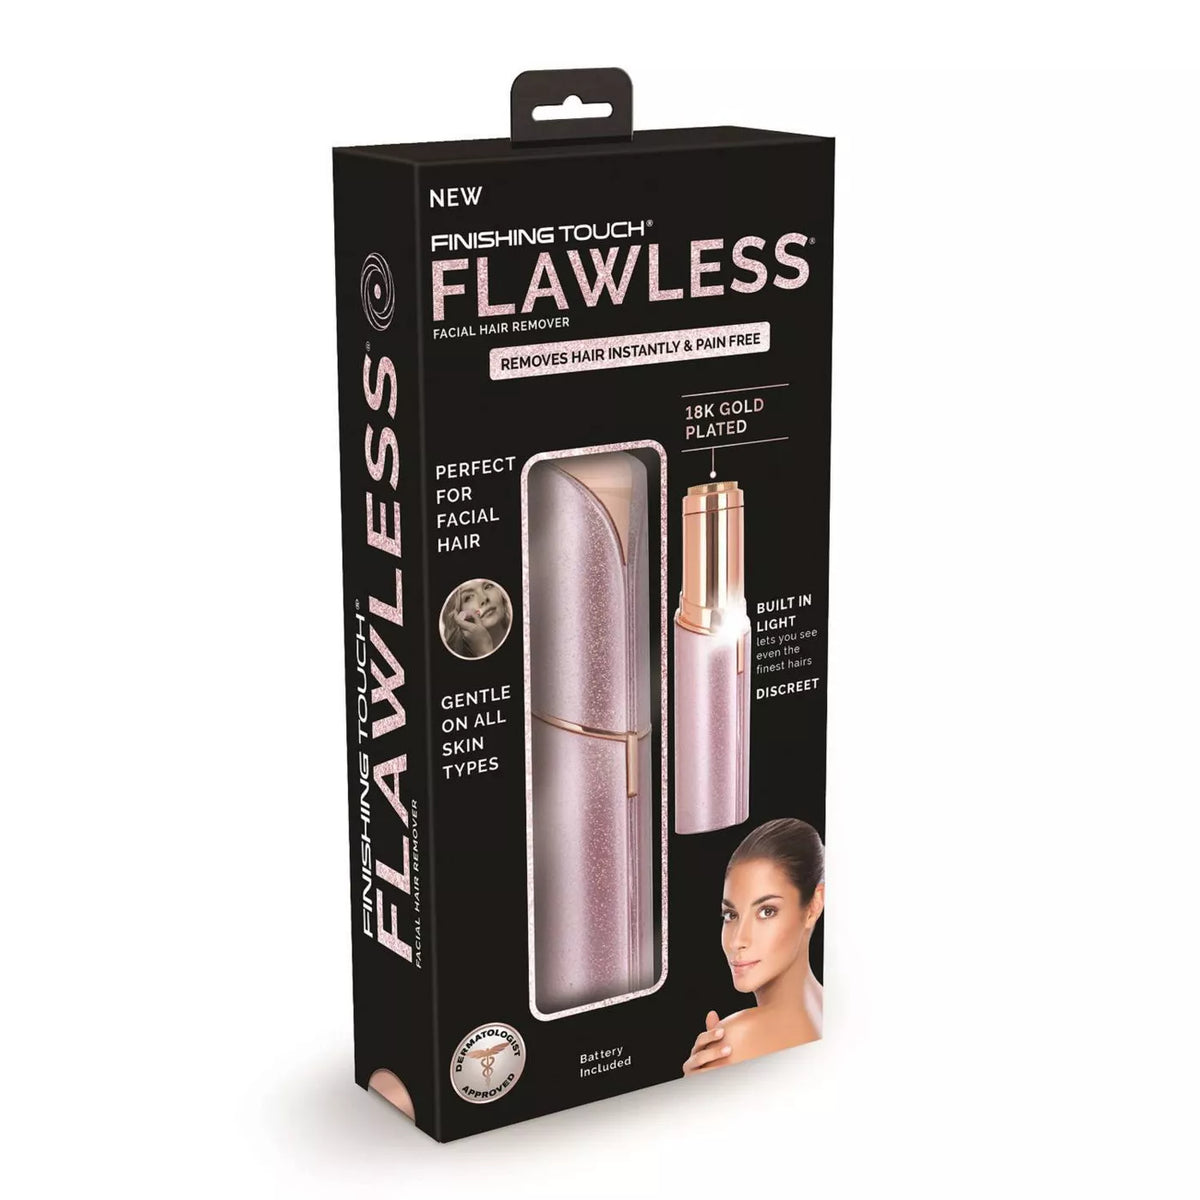 Flawless by Finishing Touch - Limited Edition Glitter